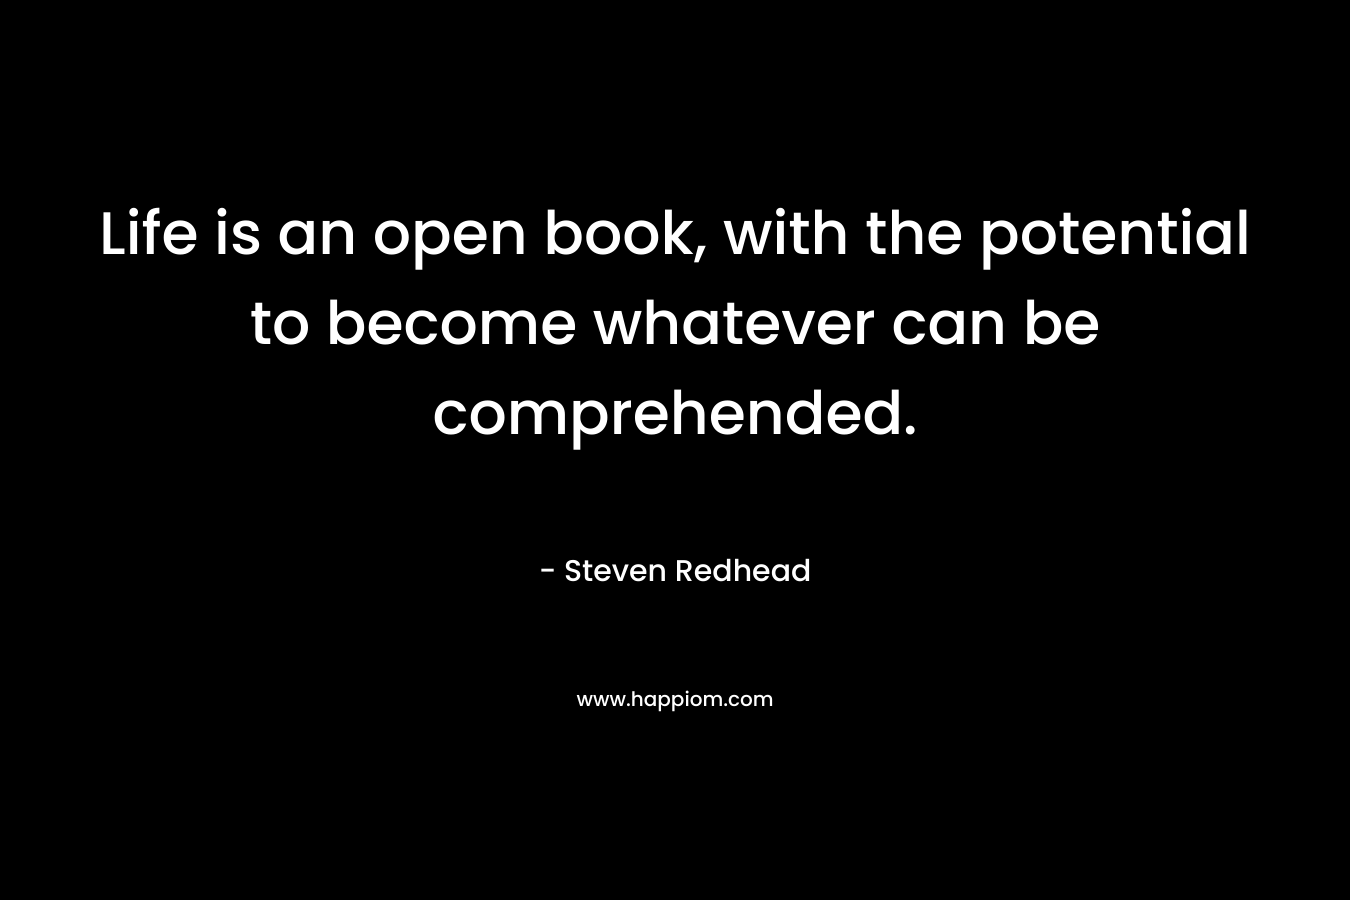 Life is an open book, with the potential to become whatever can be comprehended.